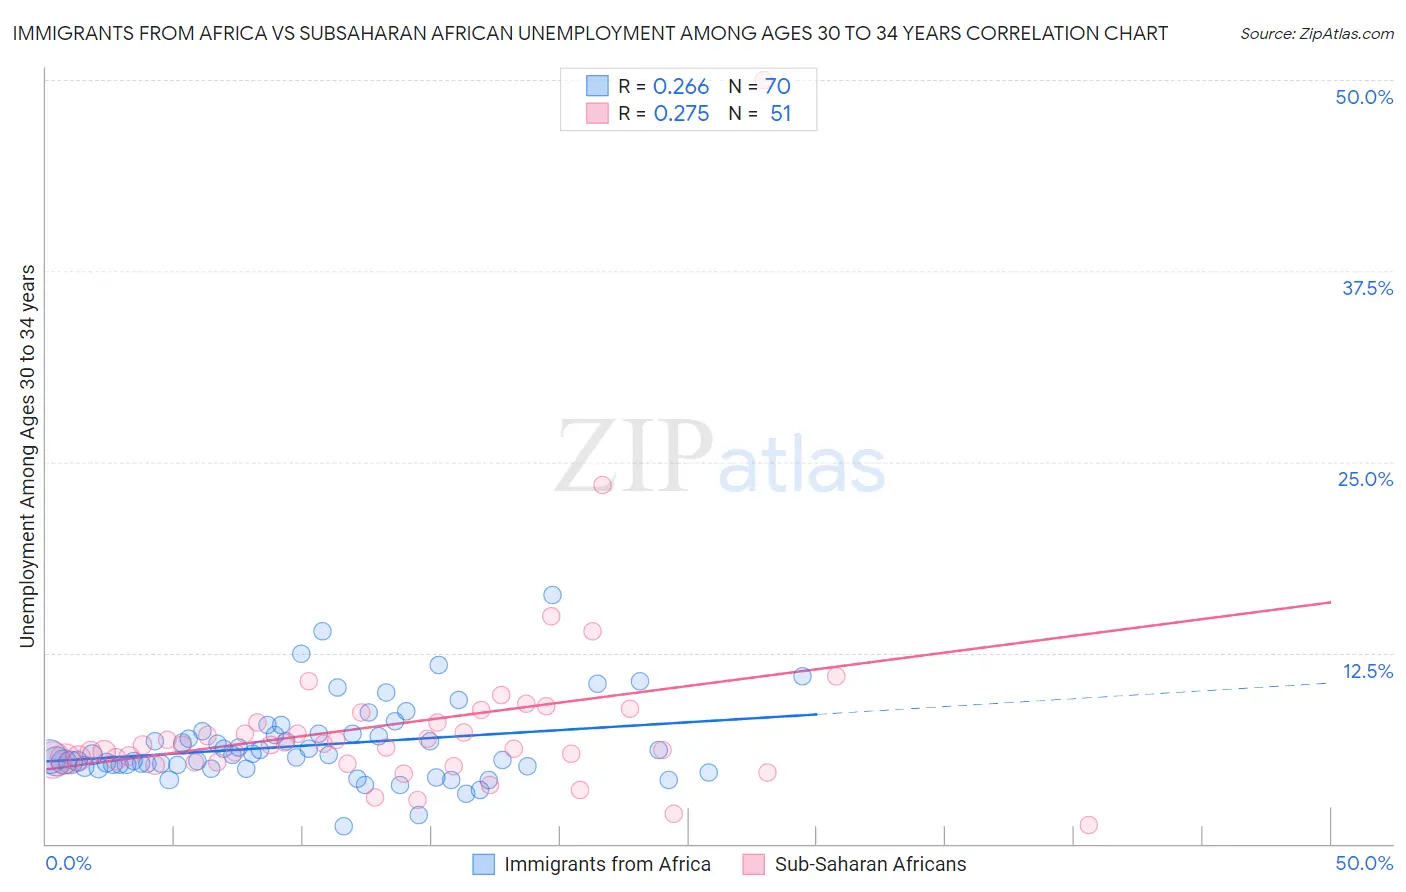 Immigrants from Africa vs Subsaharan African Unemployment Among Ages 30 to 34 years